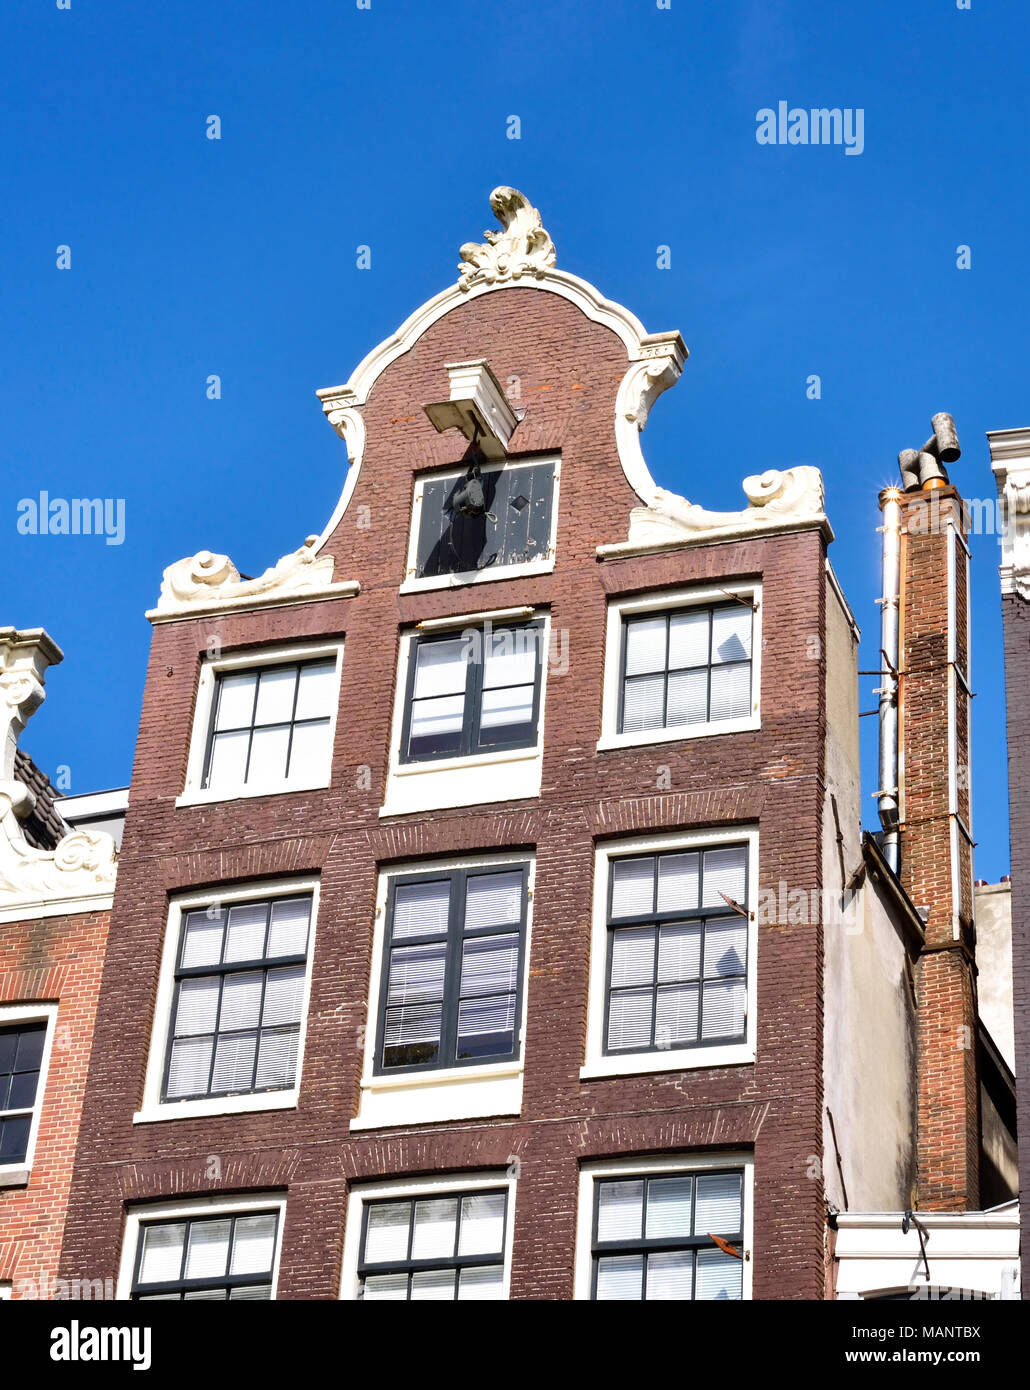 Town houses in Amsterdam, the Netherlands. Building exterior or house facade with blue sky. Stock Photo